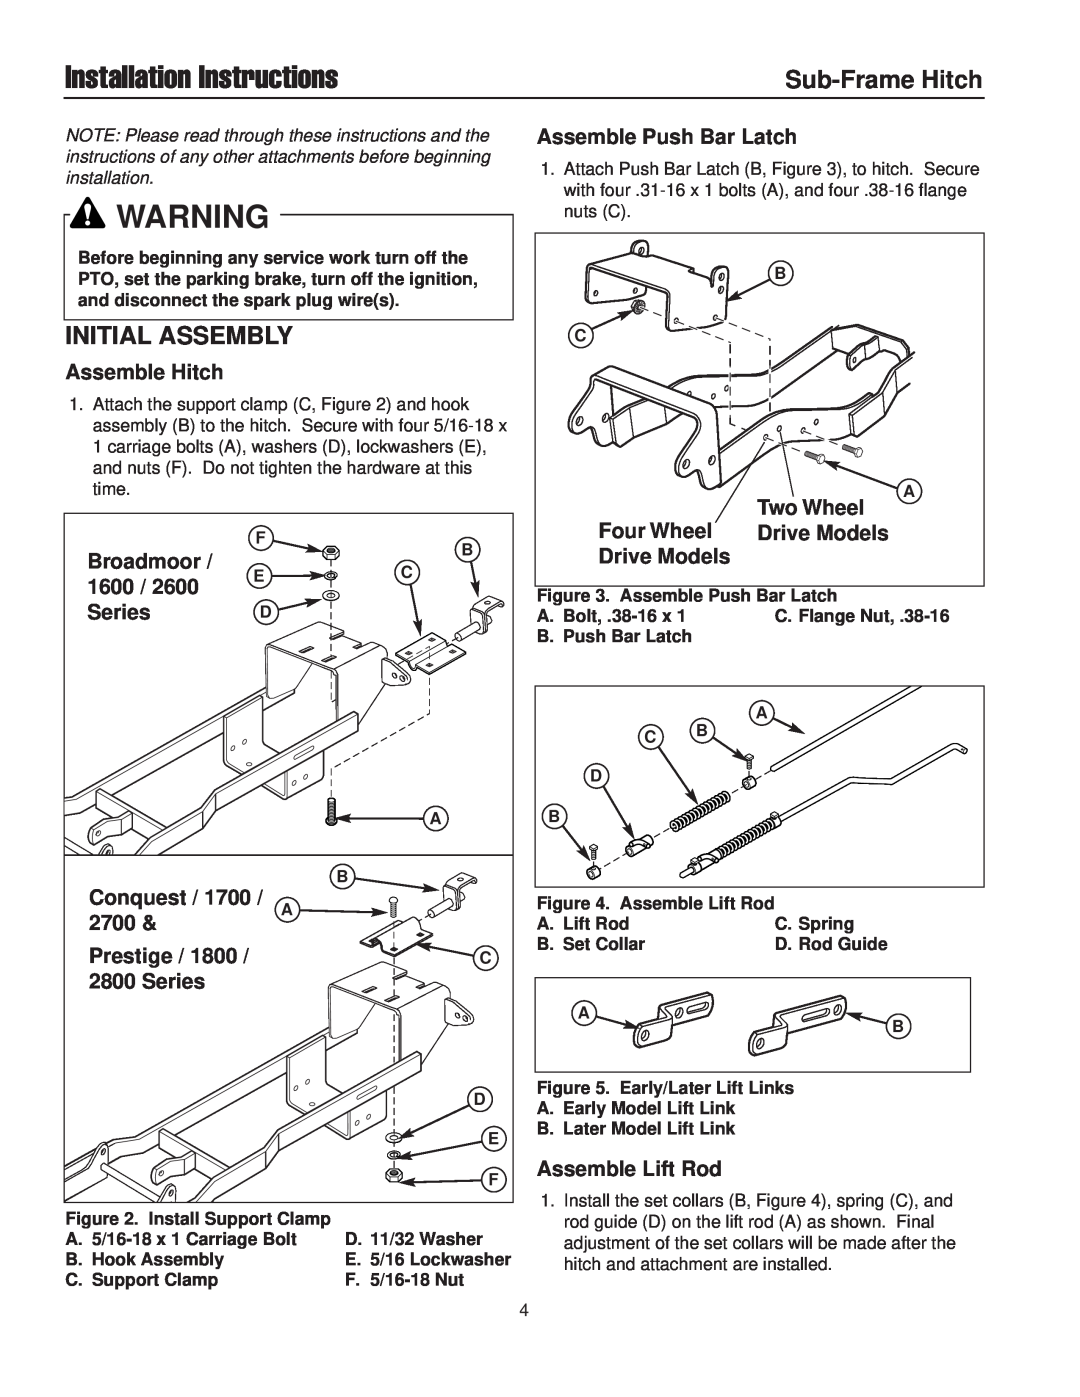 Briggs & Stratton 1700, 2600, 1600, 2800, 1800 Installation Instructions, Initial Assembly, Sub-Frame Hitch 